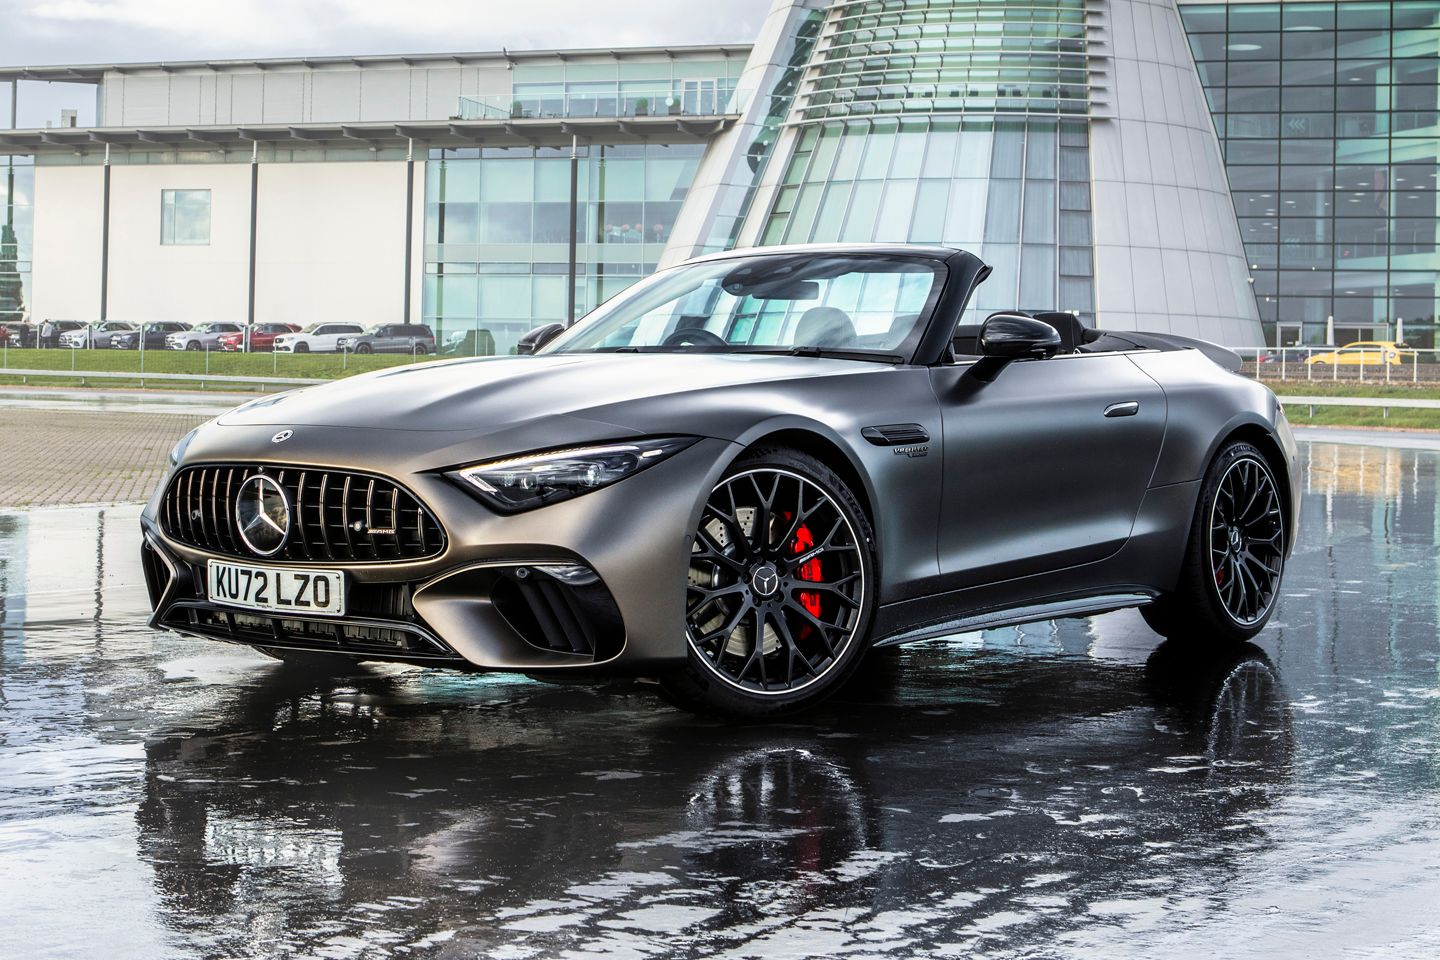 2022 Mercedes-AMG SL will come with customised luggage collection